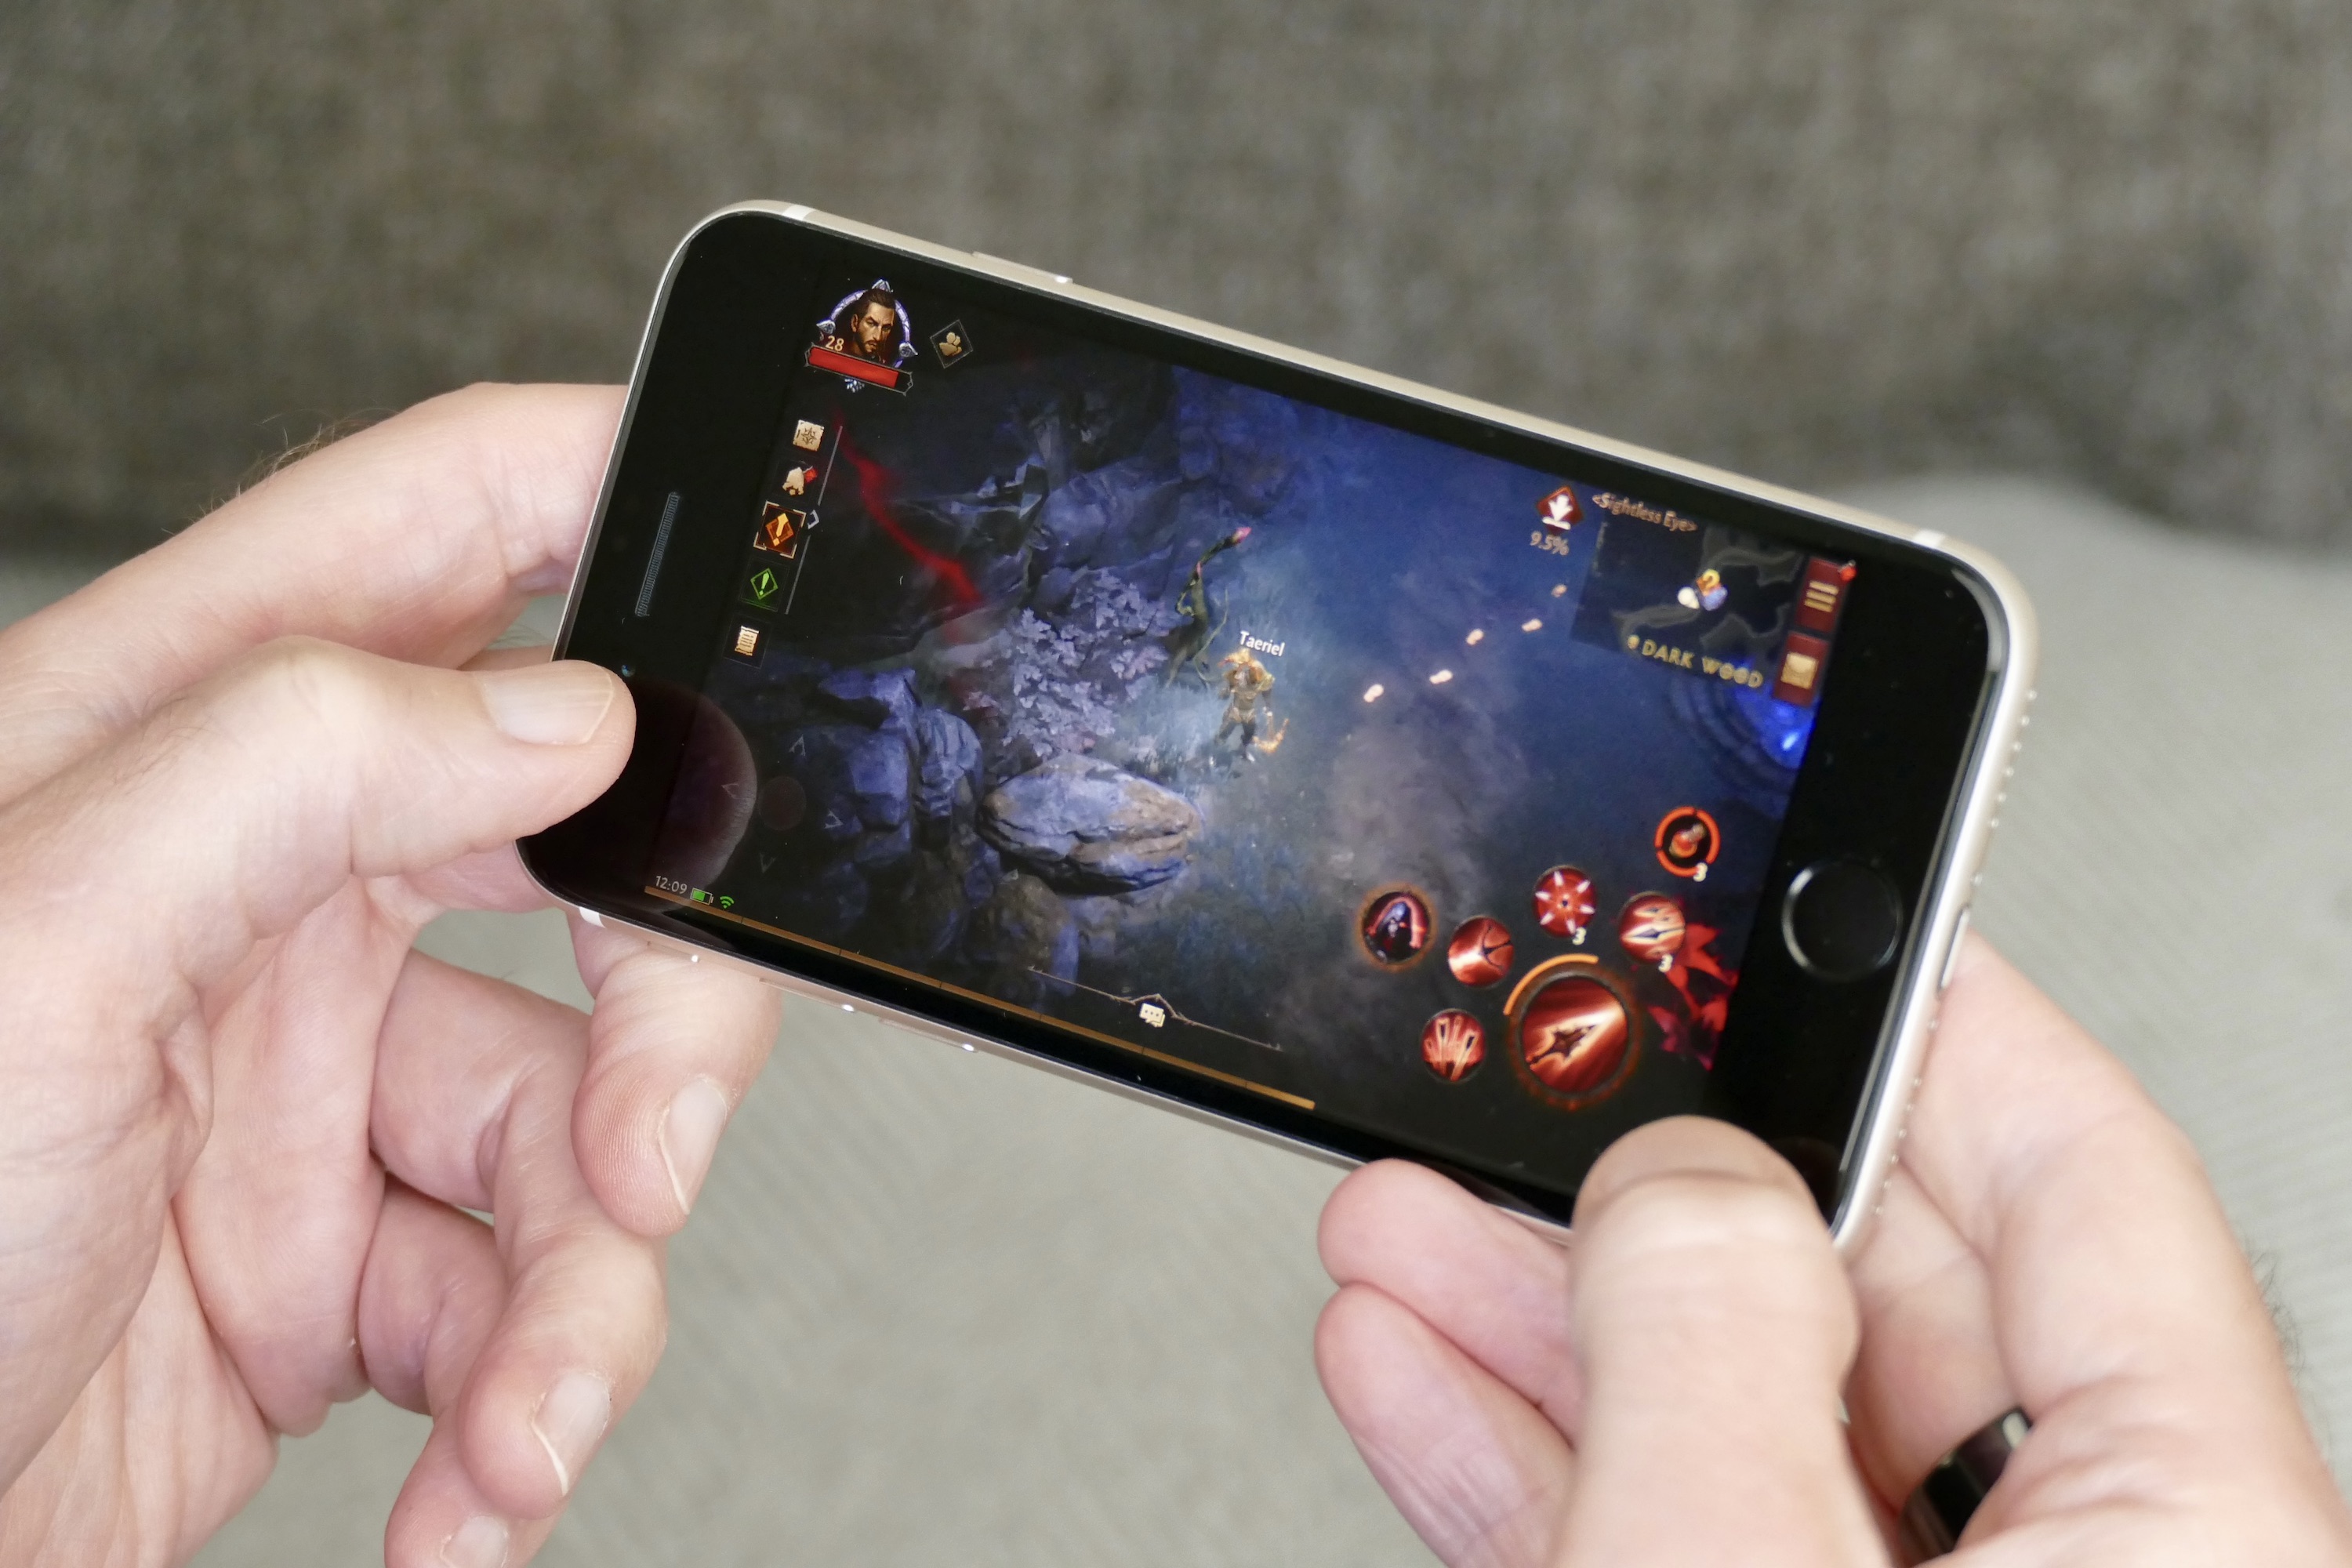 Diablo Immortal impressions: A good smartphone game saddled with